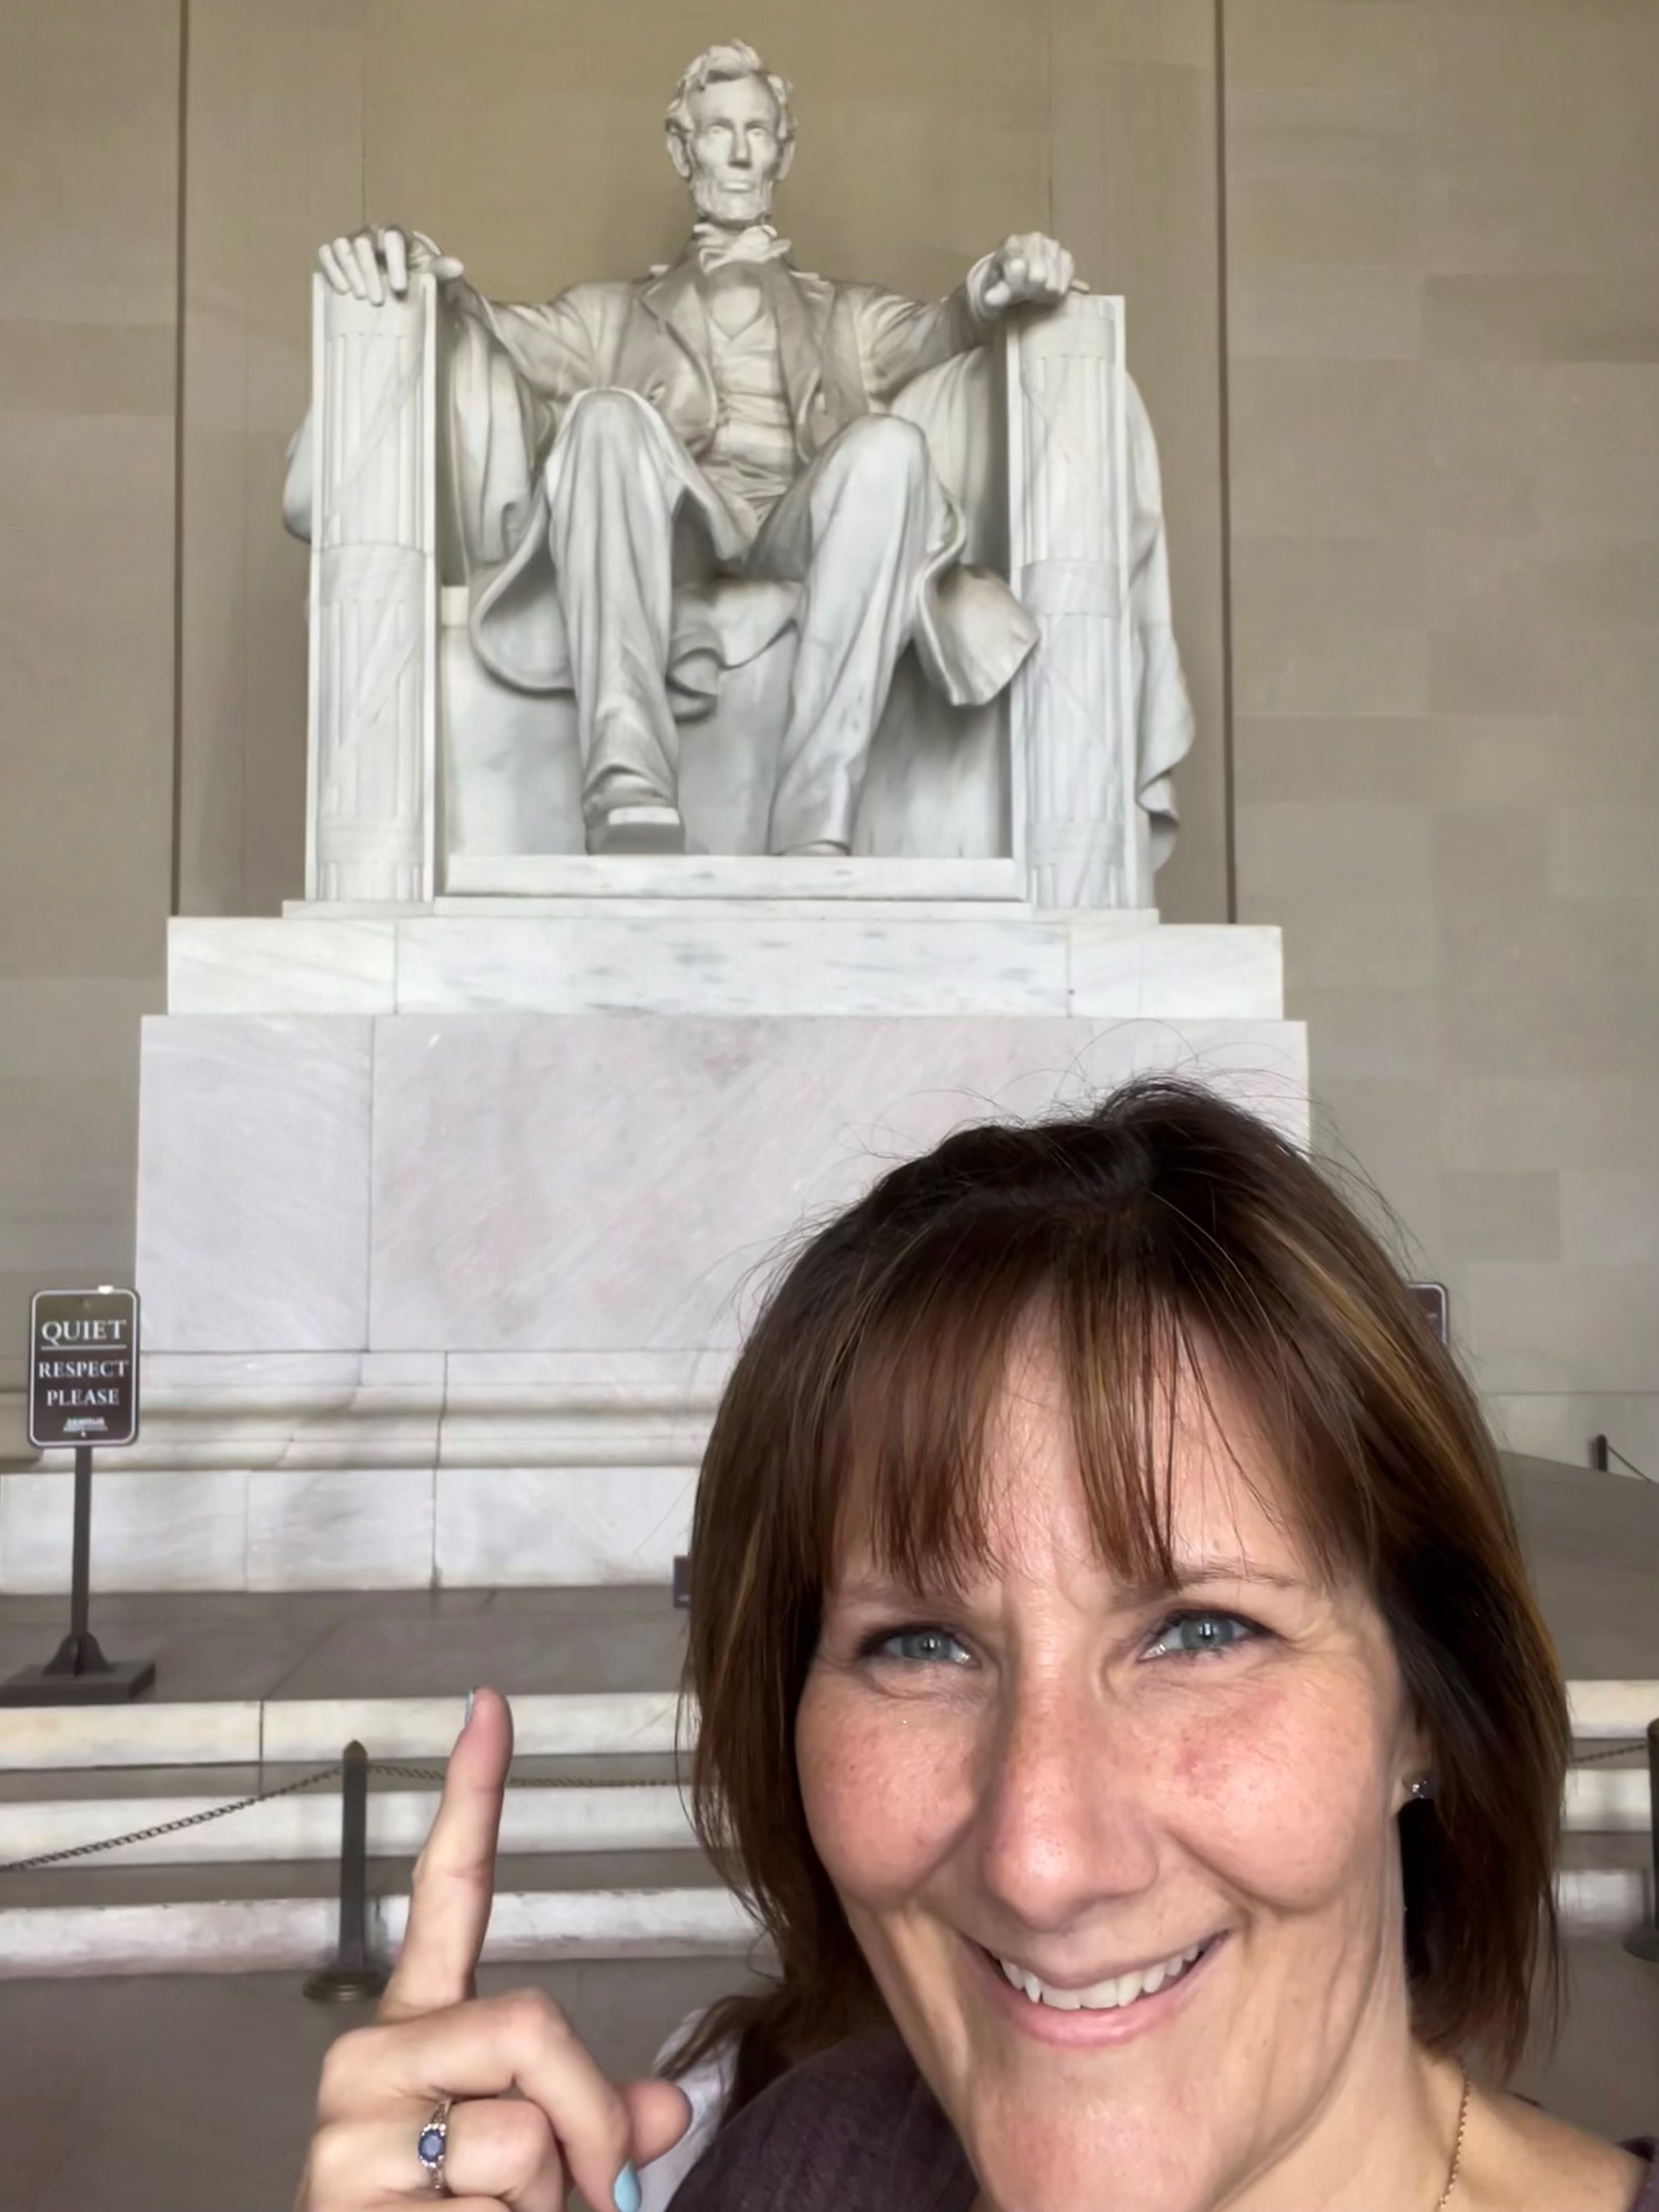 Image of Susanne Carrier in front of the Lincoln Memorial